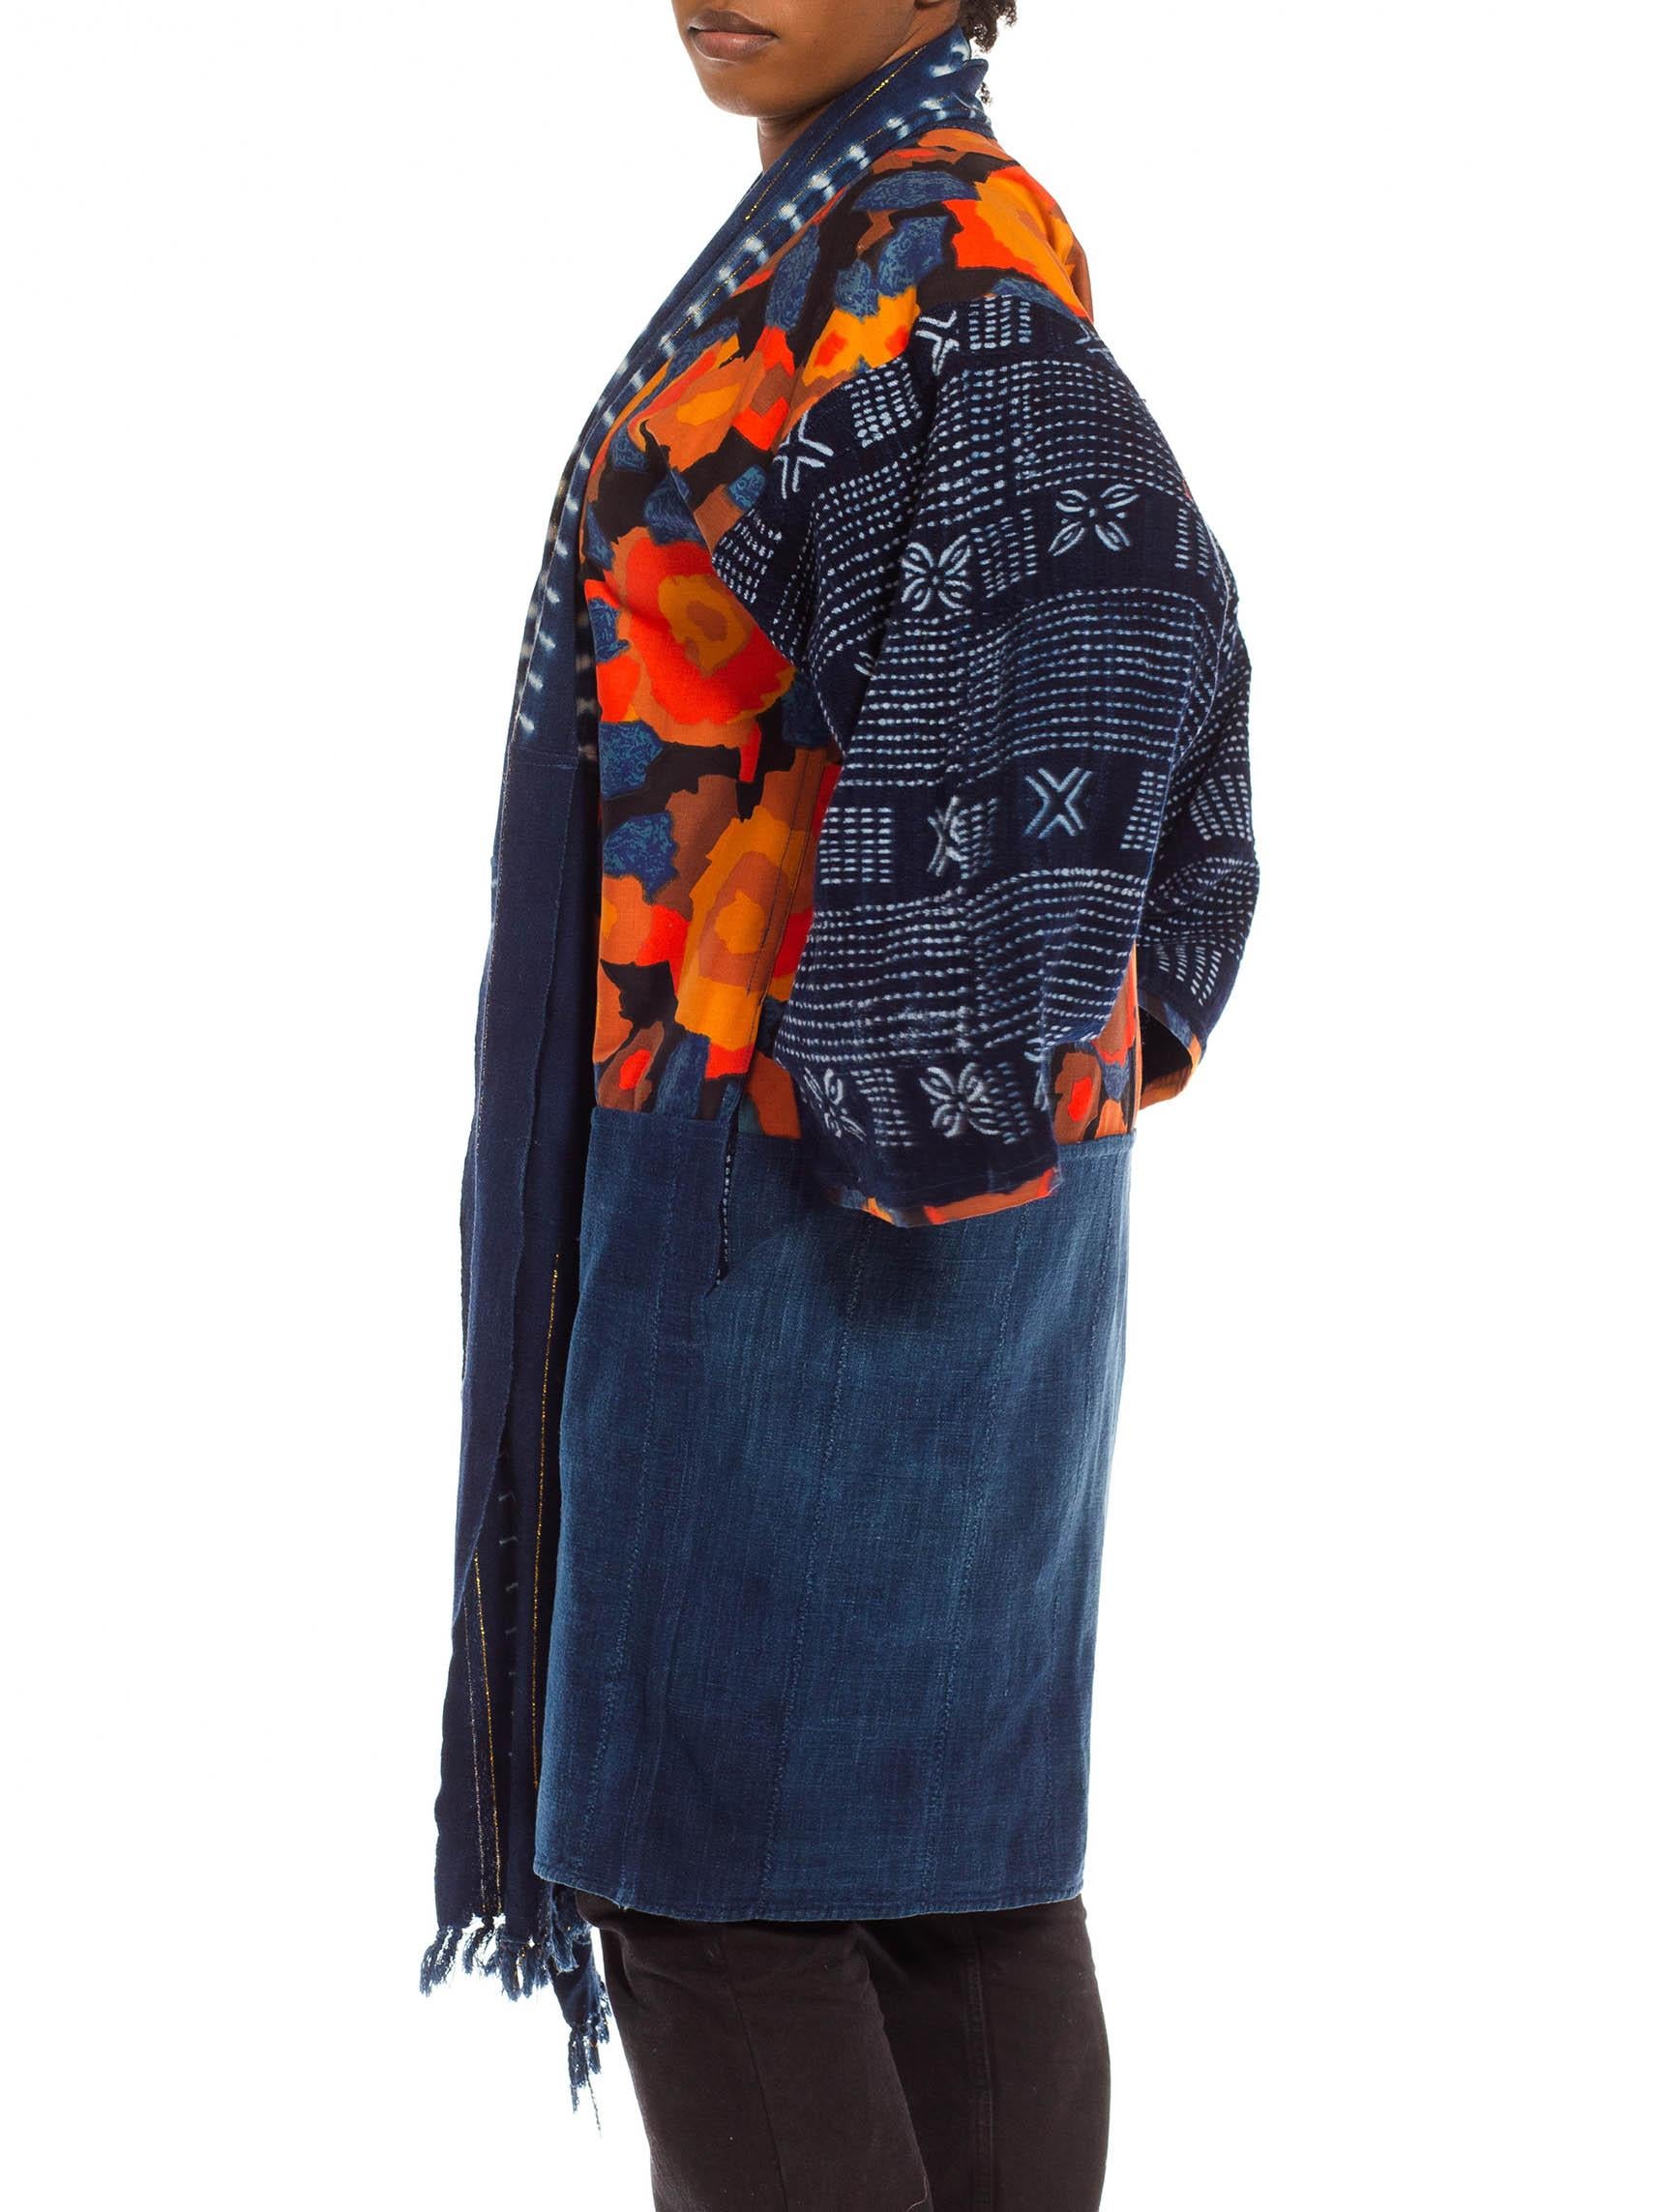 Made from vintage fabrics so small areas of wear or vintage repairs are expected and add to the story of the piece. Morphew Collection Blue & Orange Cotton Up-Cycled African Indigo Vintage Fabric Duster 
MORPHEW COLLECTION is made entirely by hand